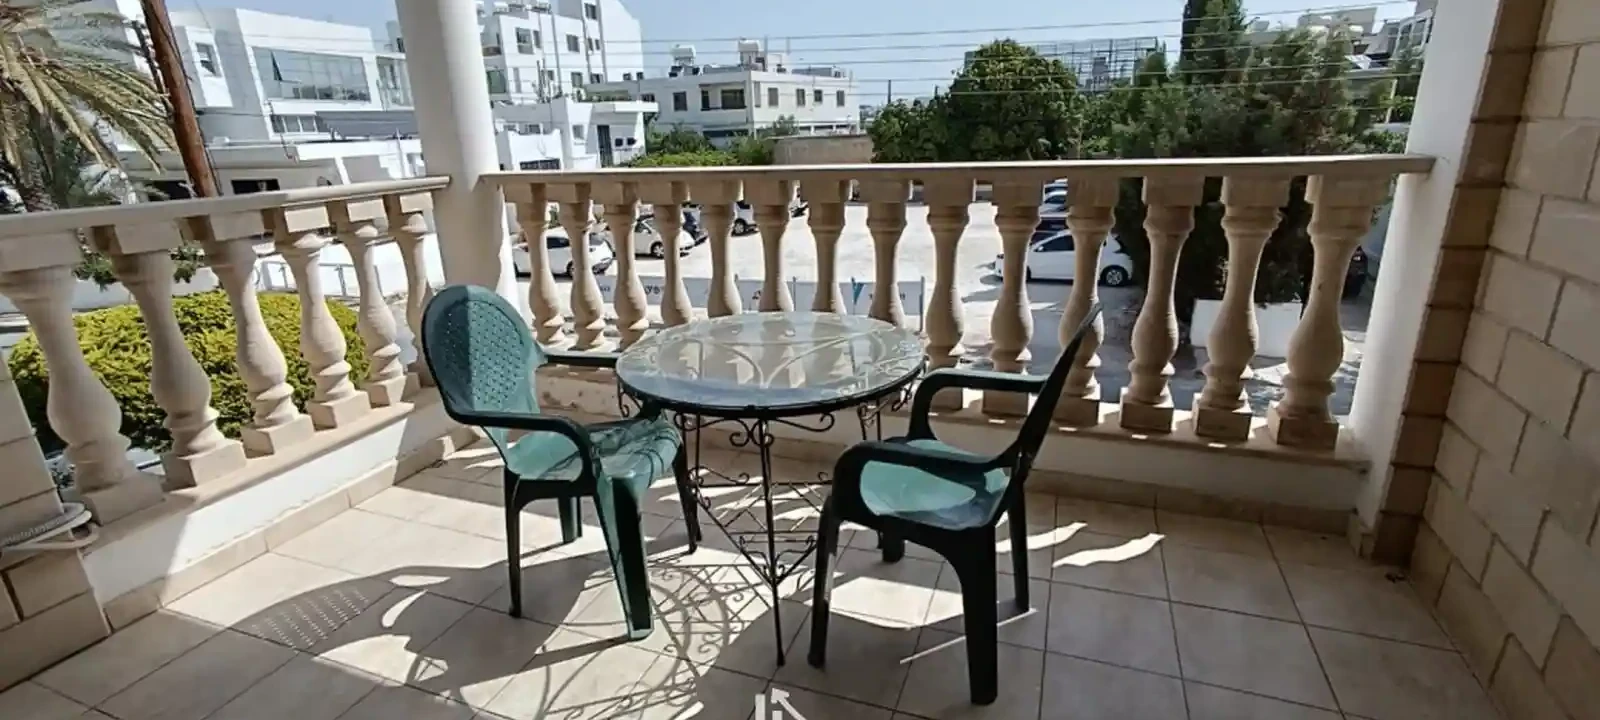 4-bedroom penthouse to rent €1.650, image 1